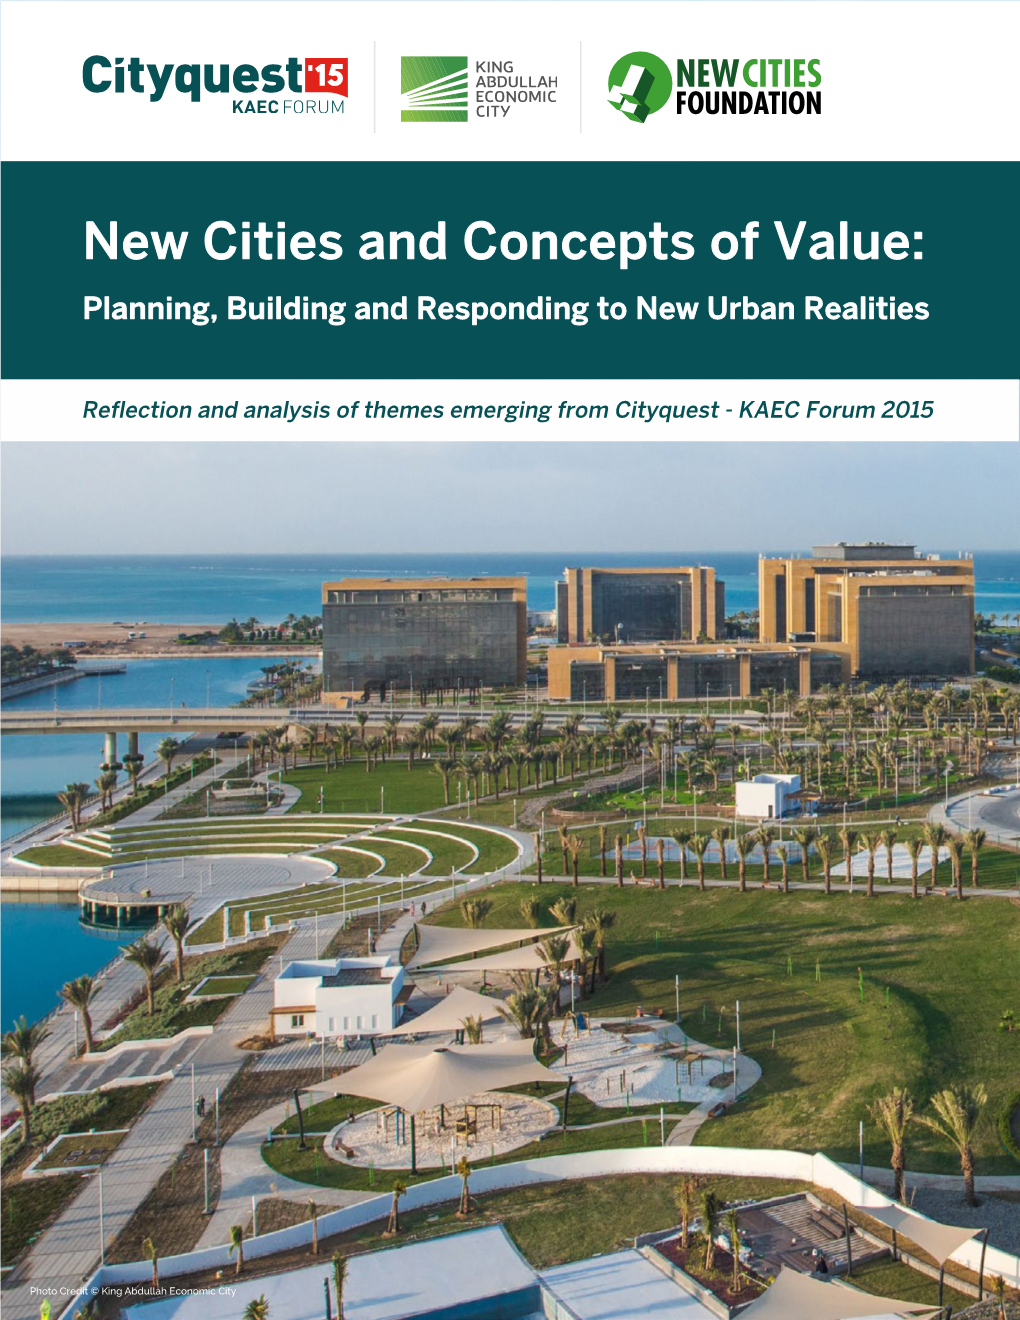 New Cities and Concepts of Value: Planning, Building, and Responding to New Urban Realities